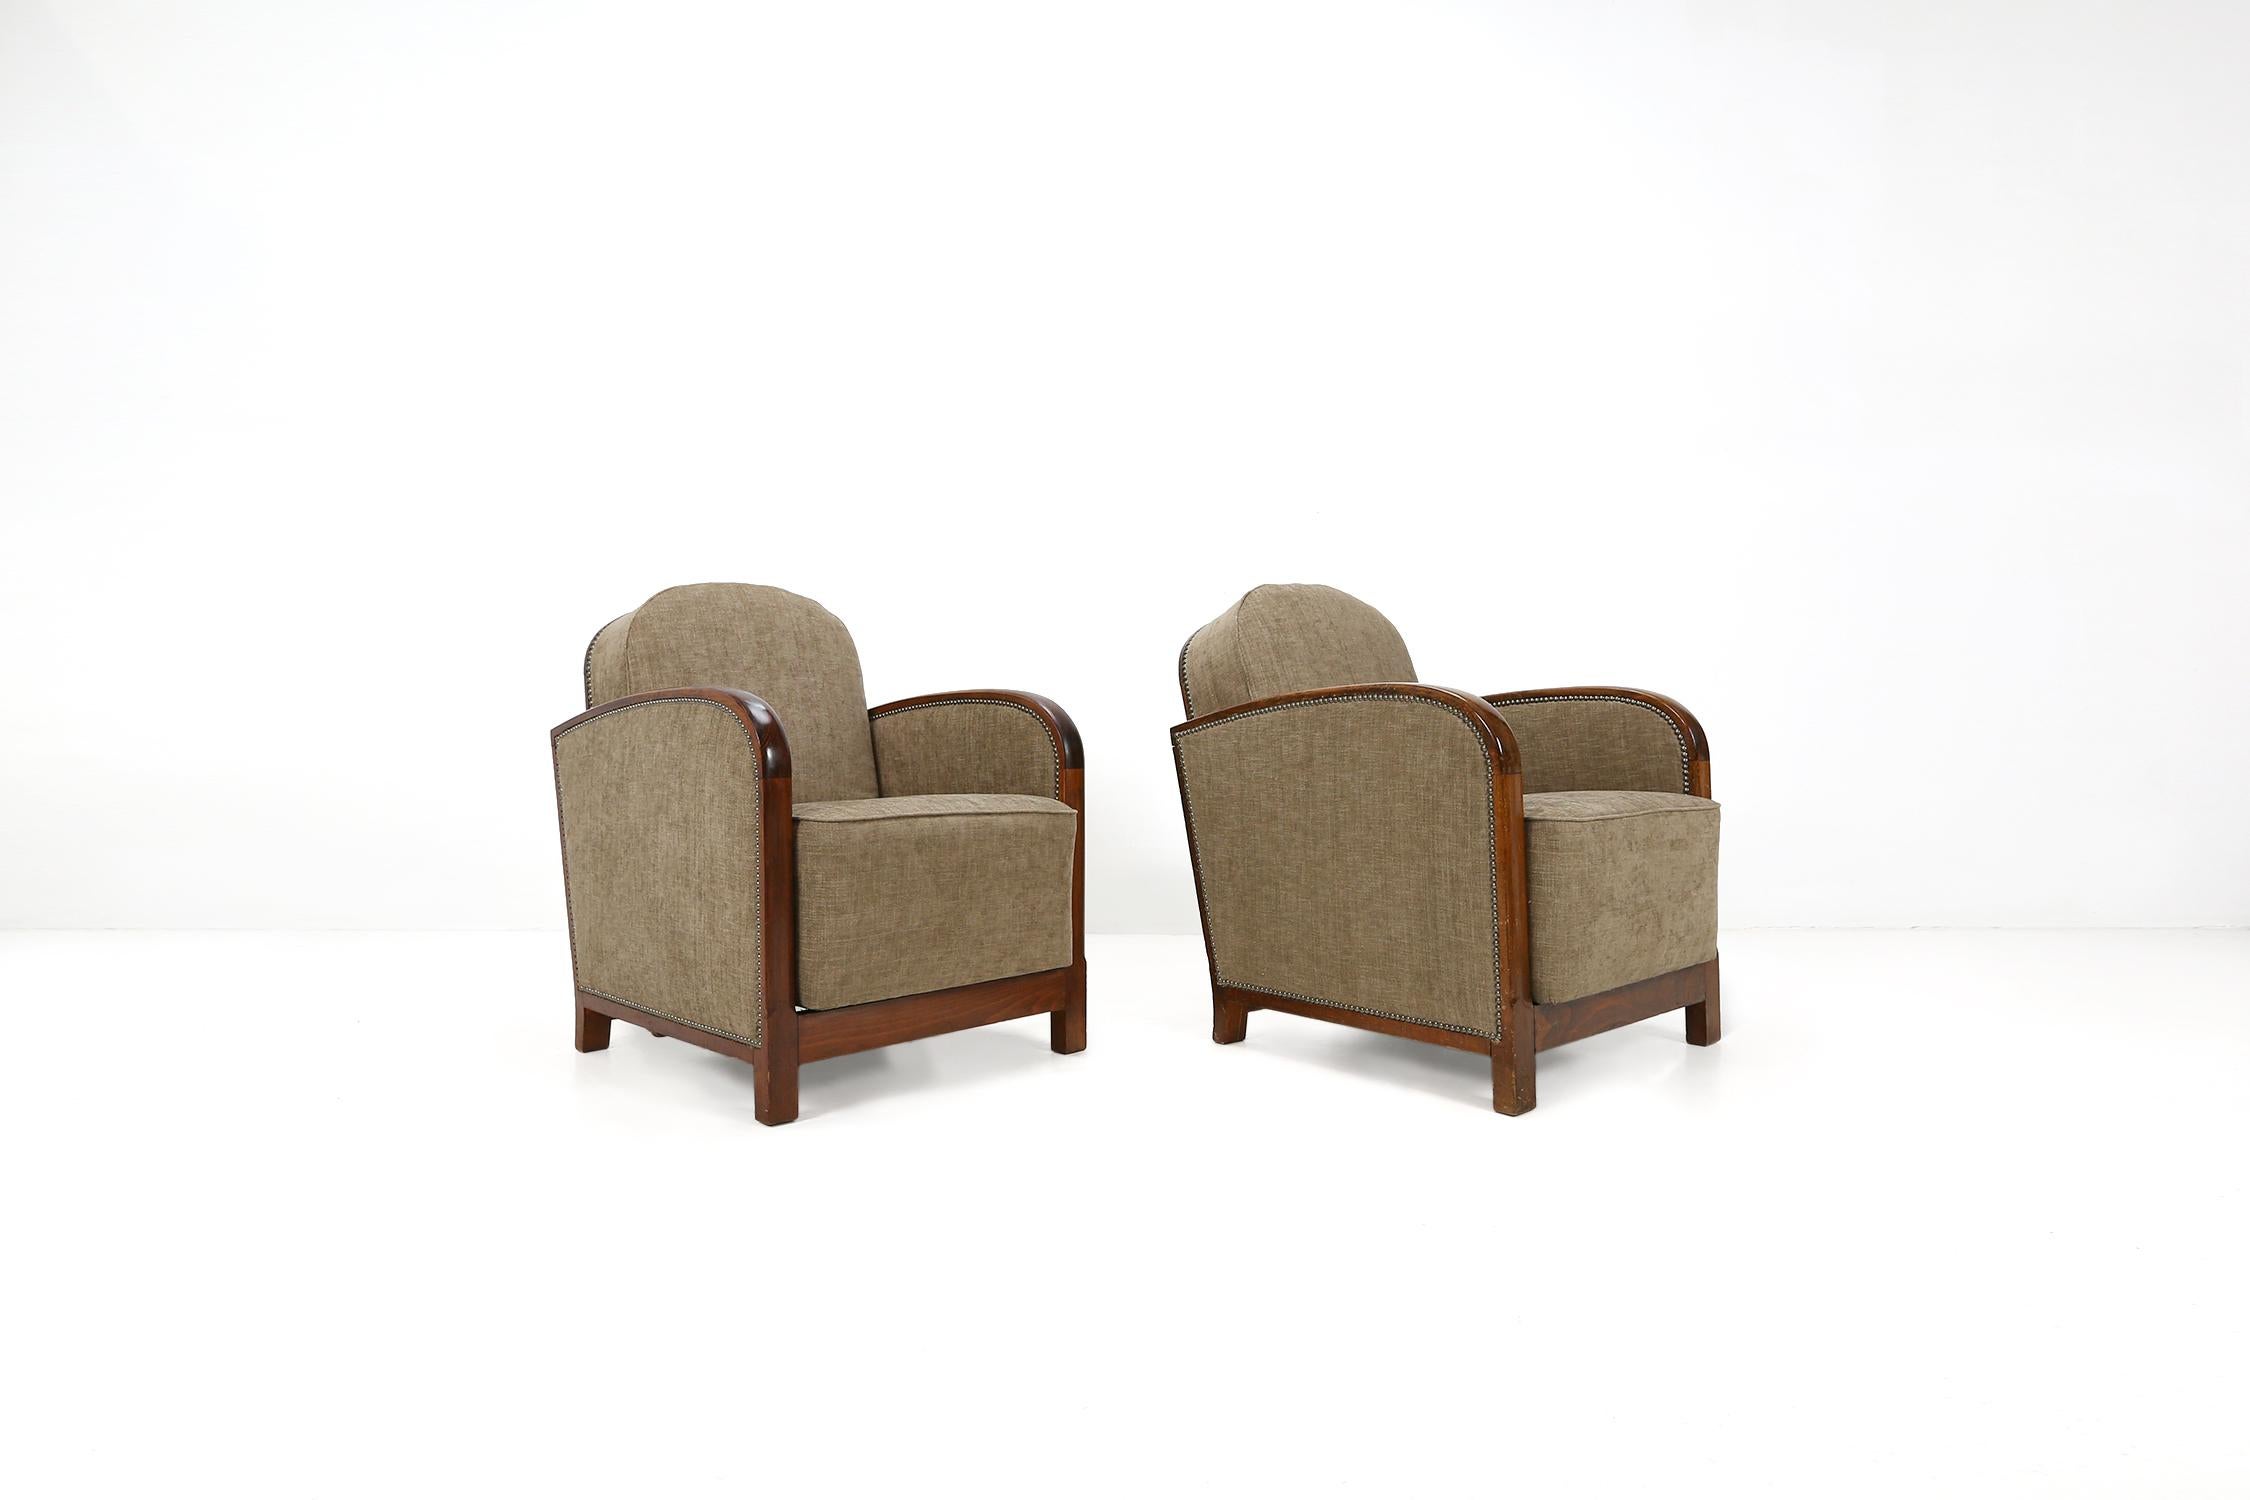 Set of two french Art Deco armchairs with matching ottoman.
Reupholstered in a light brown fabric and wooden base.
The backrest can be moved back for more seating comfort.

Dimensions ottoman:
height: 41 cm
Width: 52 cm
Depth: 52 cm.